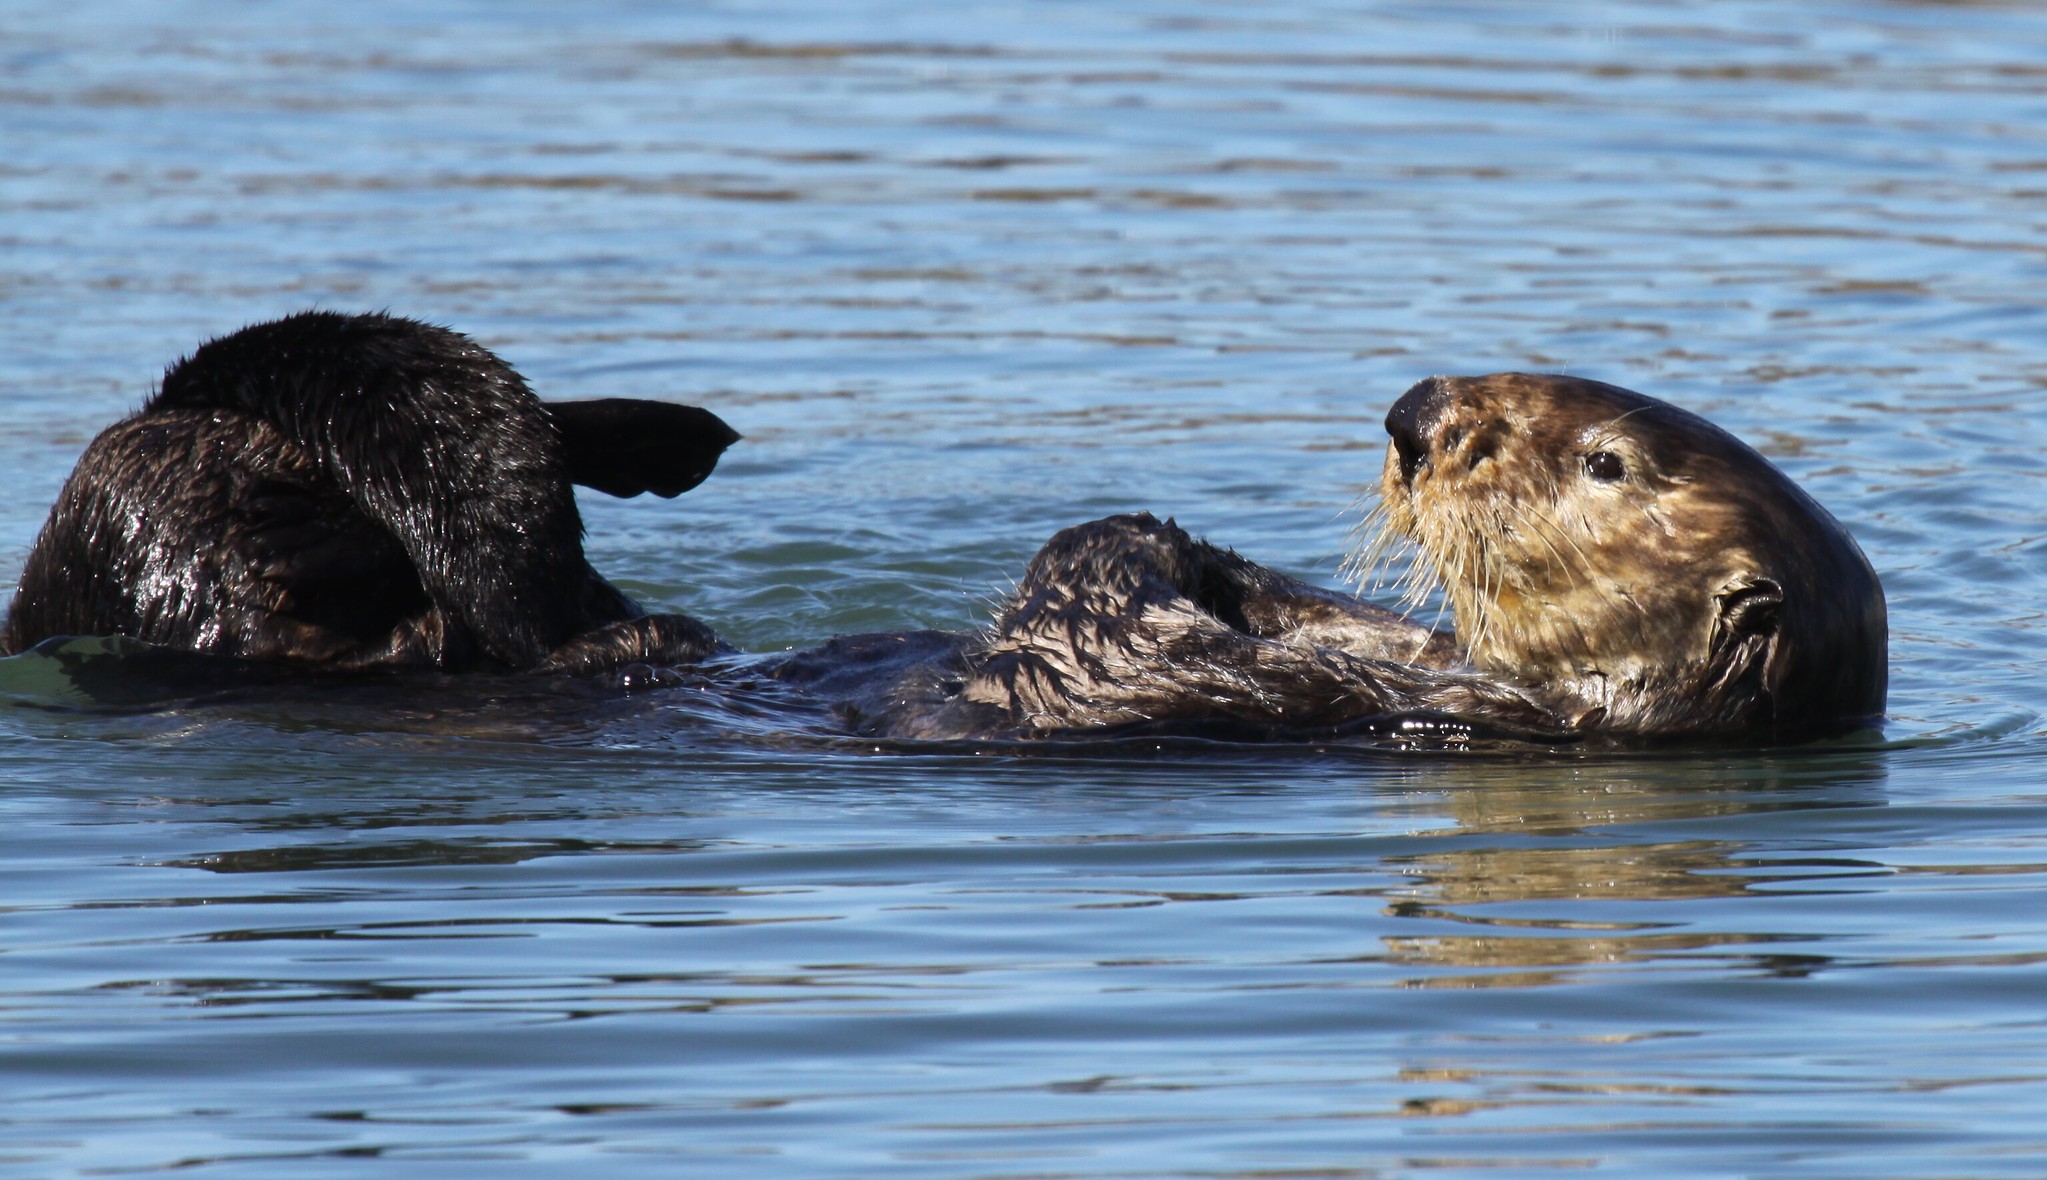 A sea otter twists its body in the water.